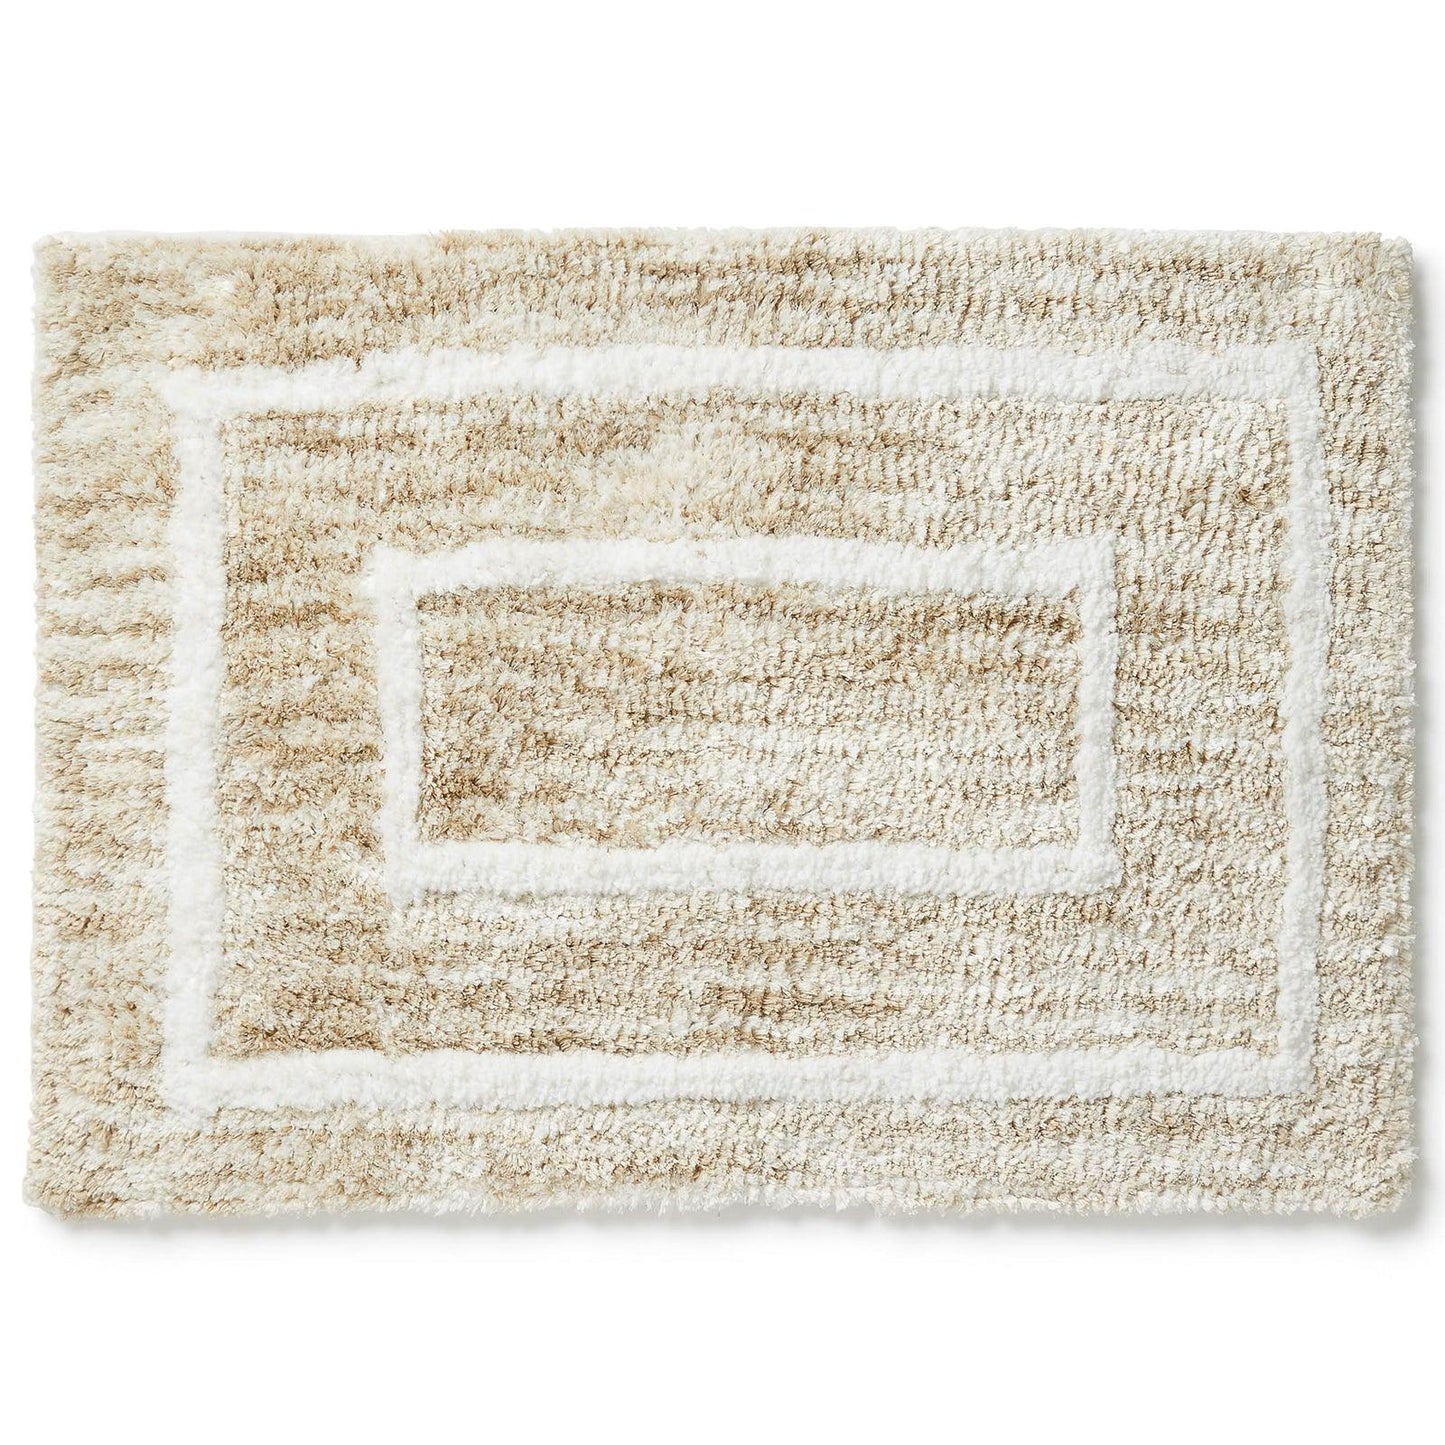 Soft and Absorbent Tufted Bath Mat - 17x24 Inches - Double Rectangle Pattern - Home > Home & Living > Bathroom > Bath Mats & Rugs - Americanflat